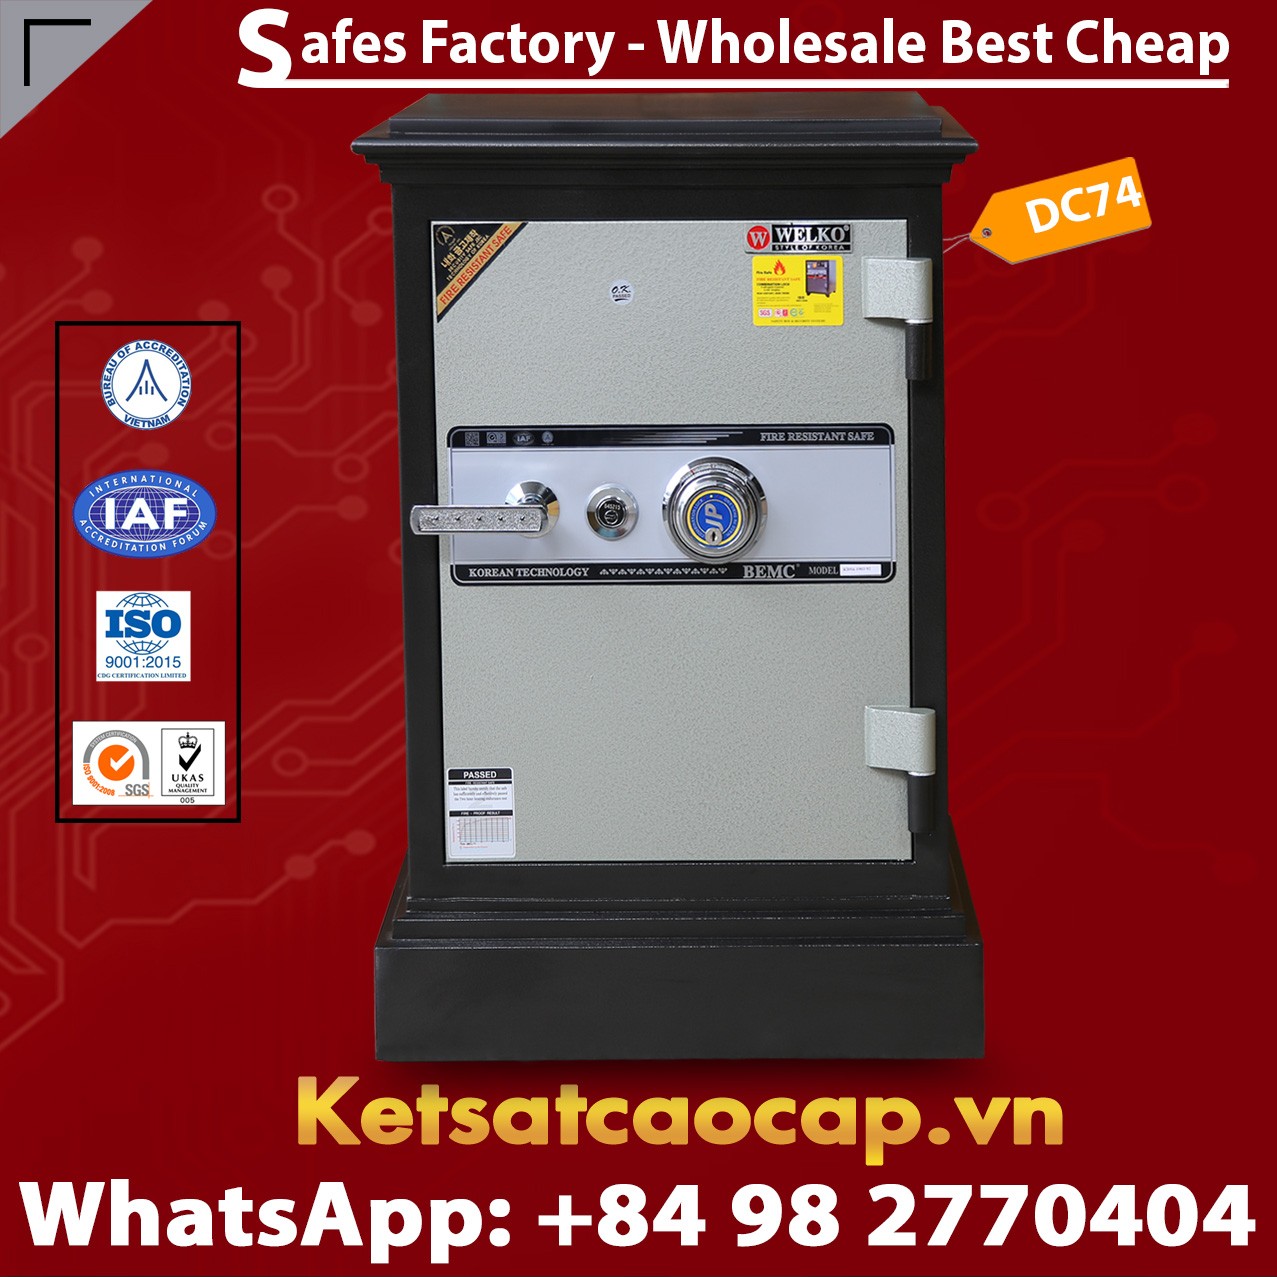 Home Safe Wholesale Suppliers